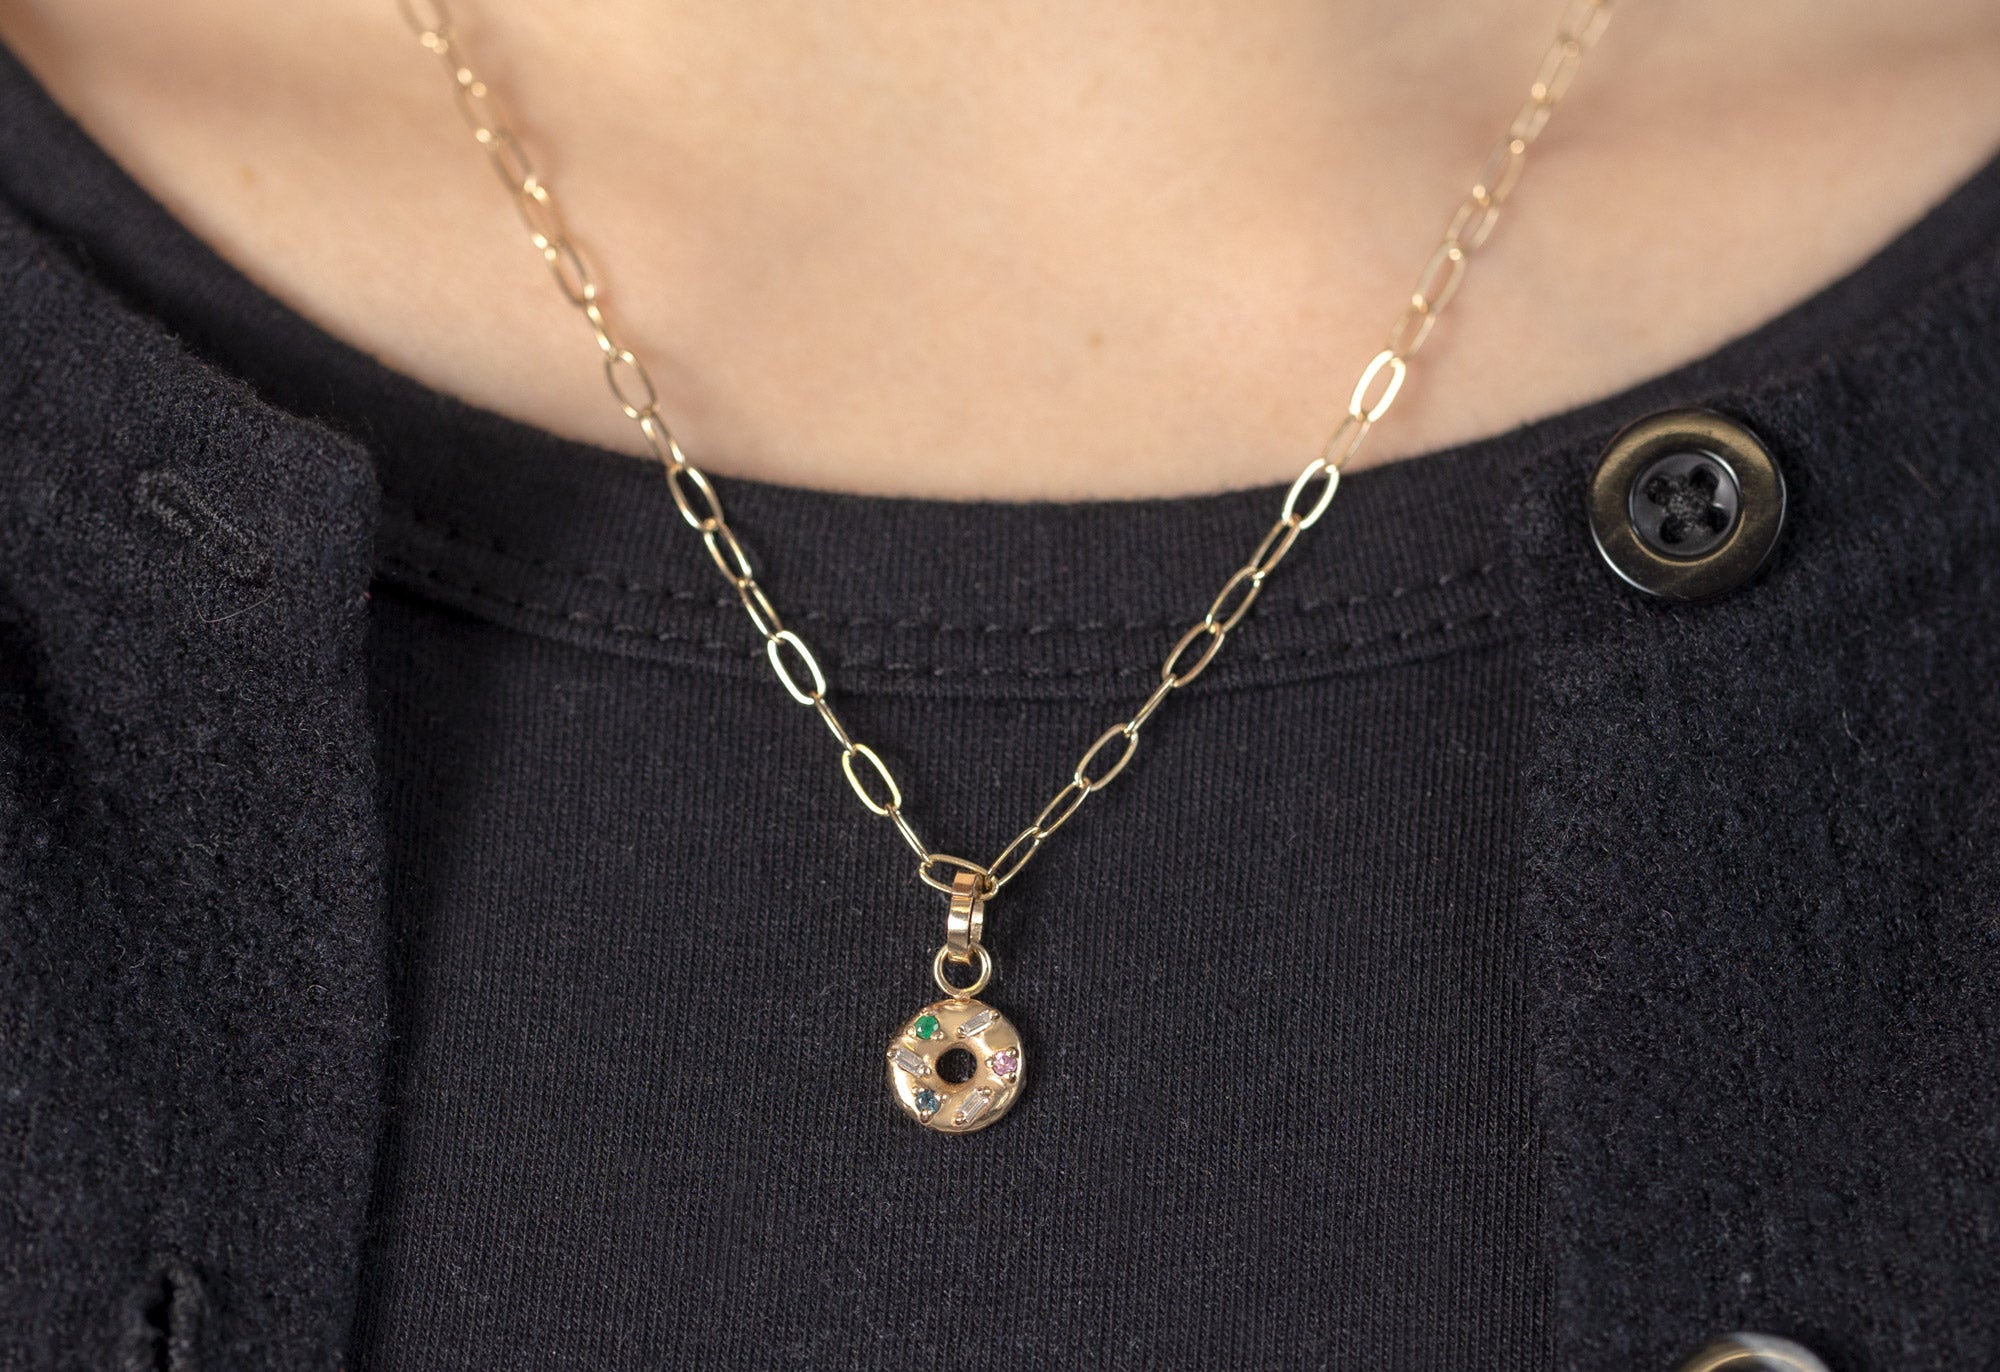 10k Yellow Gold Donut Charm on Necklace Chain on Model